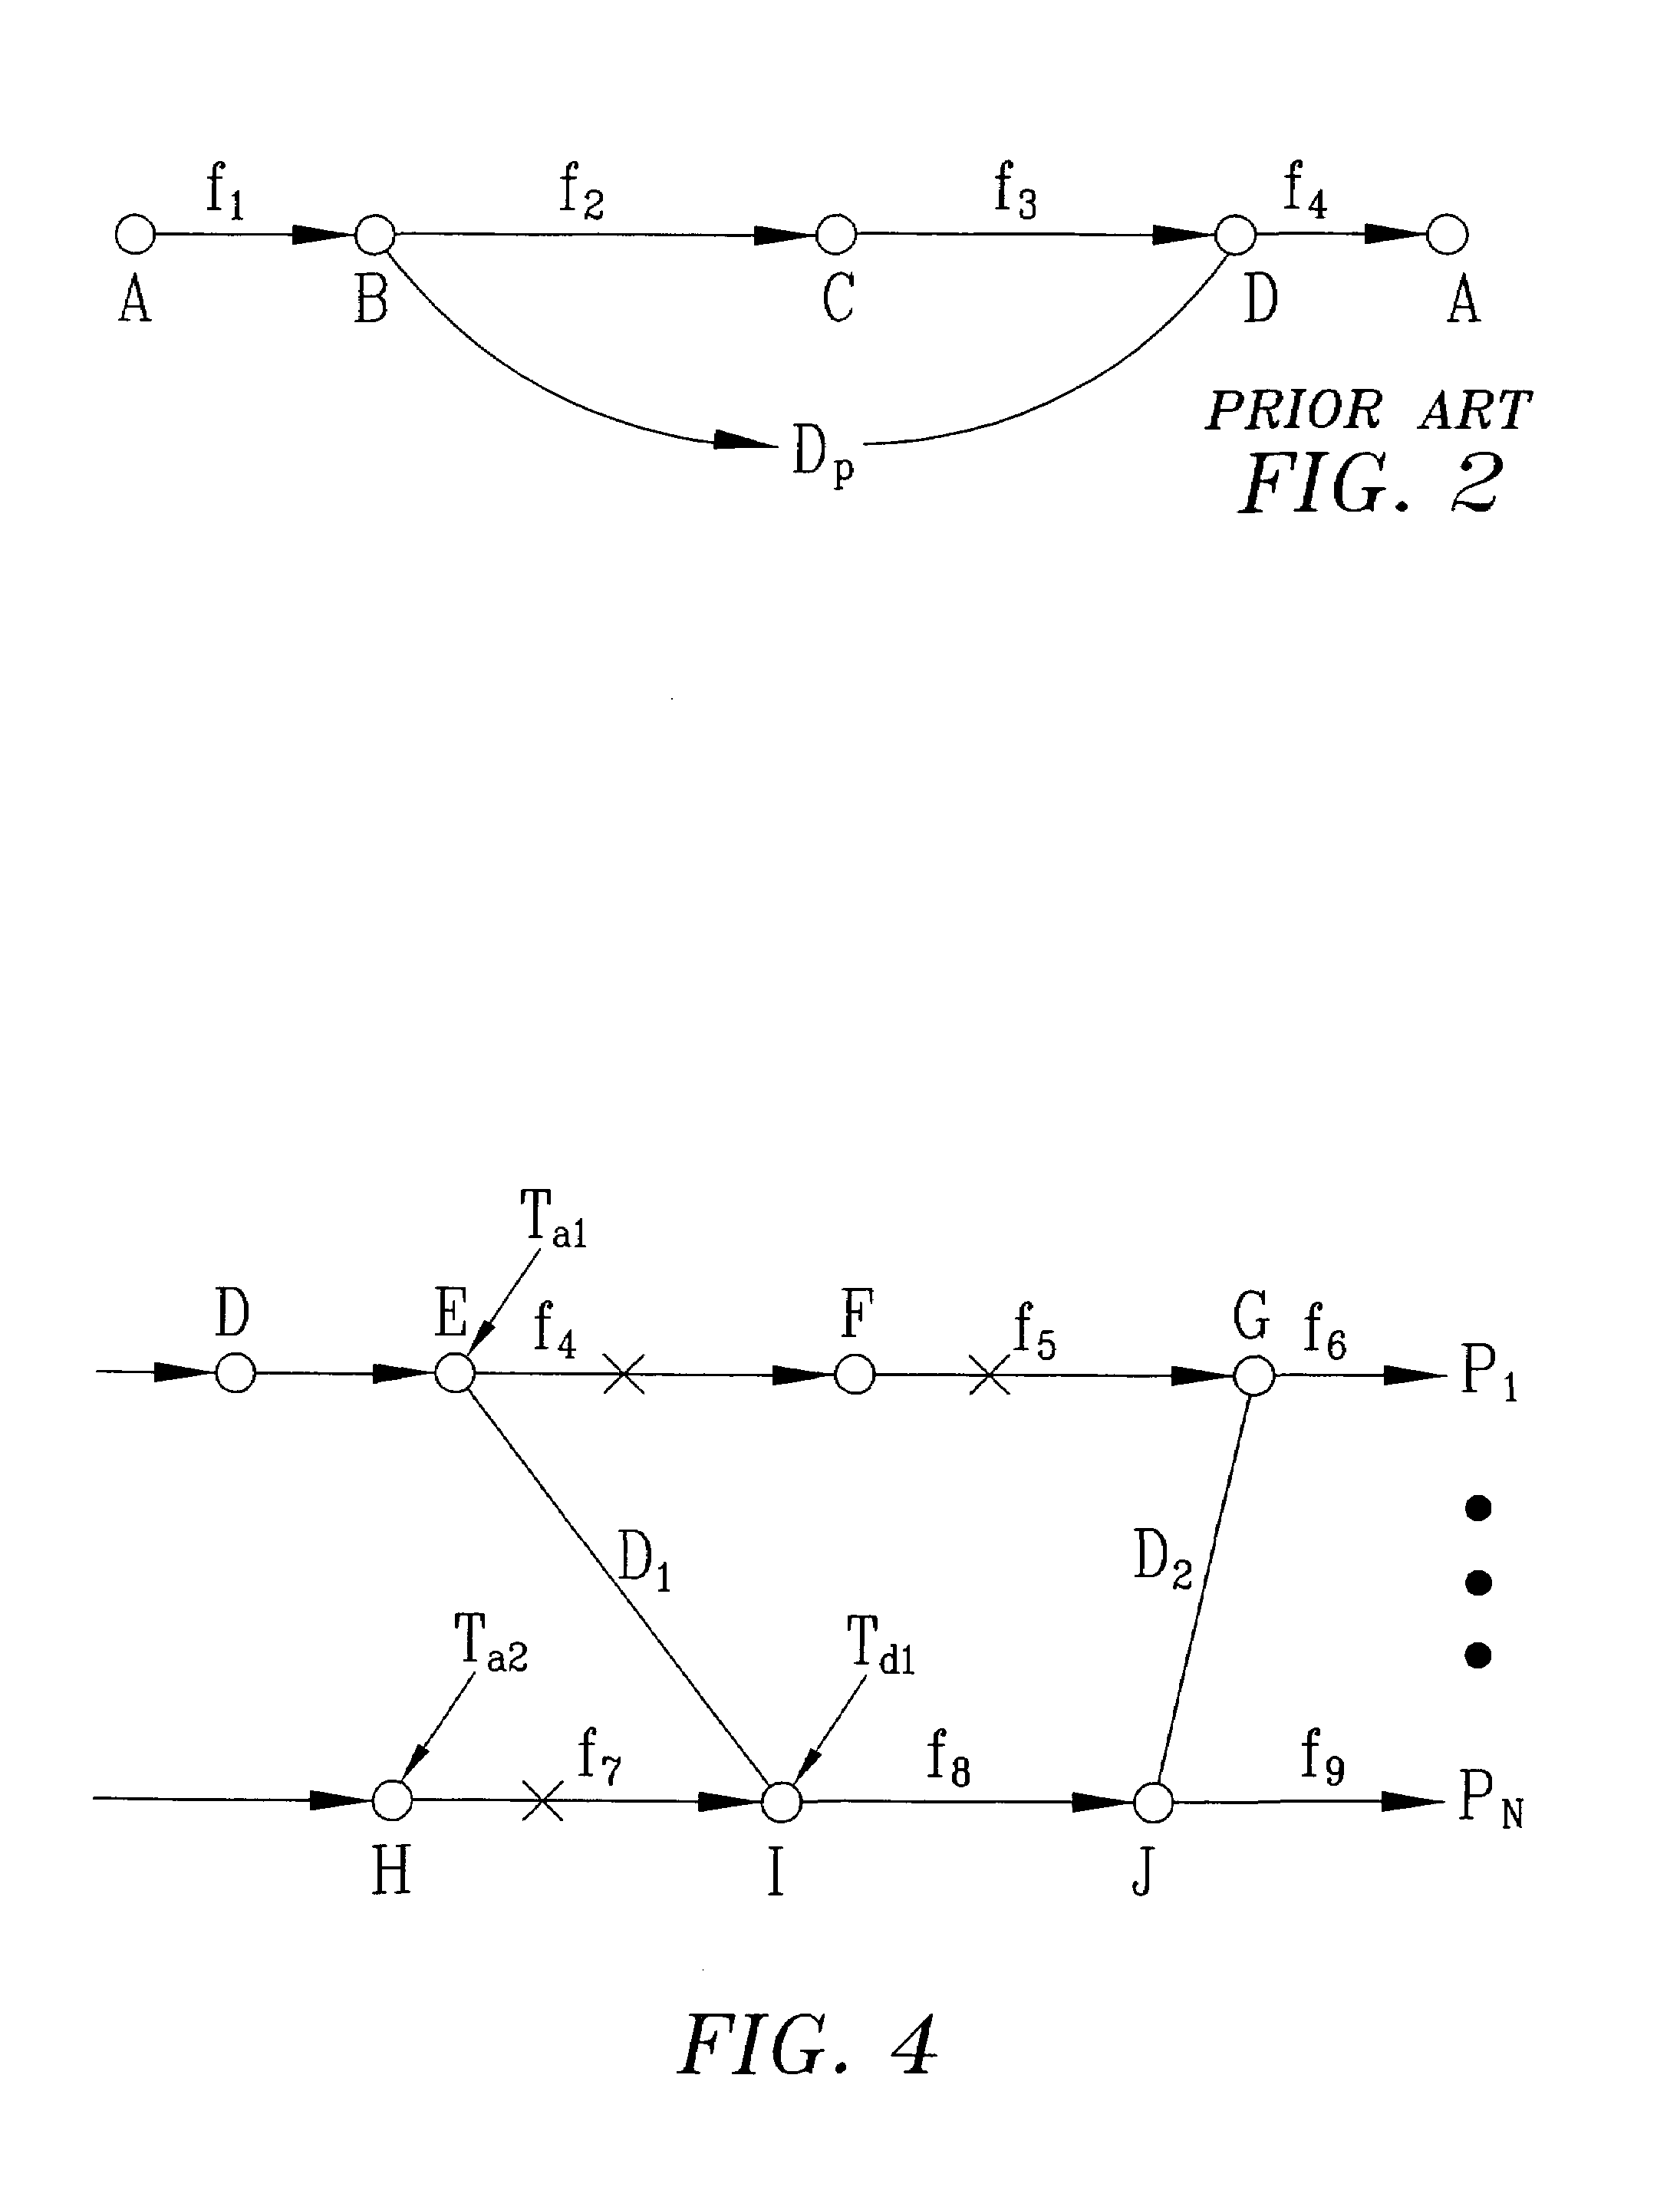 Method and system for generating optimal solutions for open pairings through one-way fixes and matching transformations